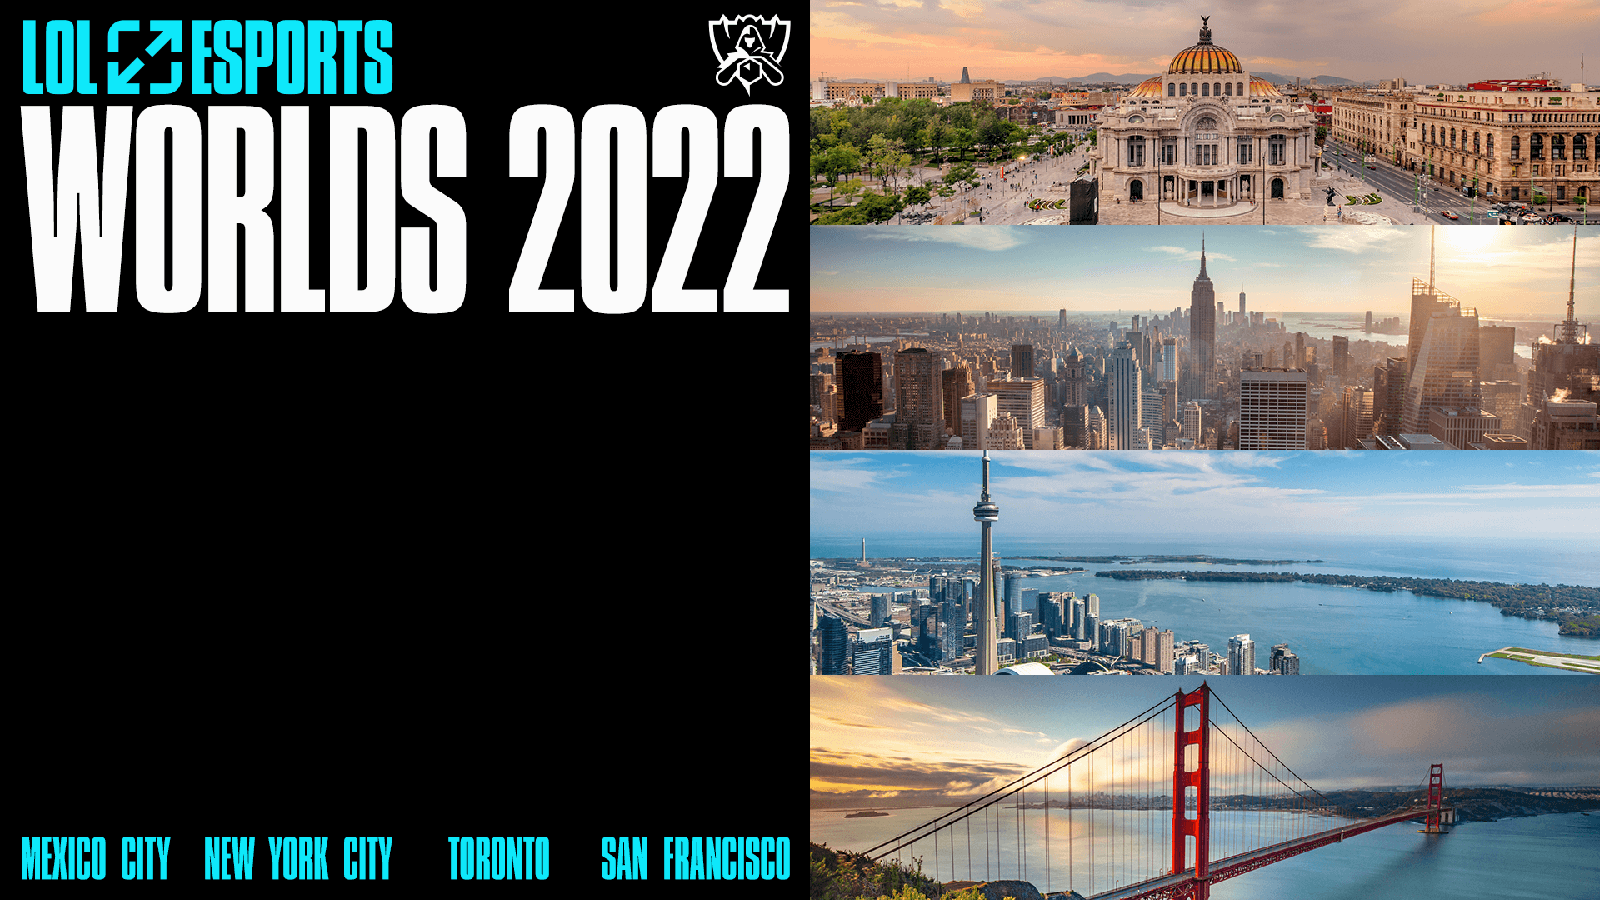 League of Legends 2022 World Championship to be held in San Francisco